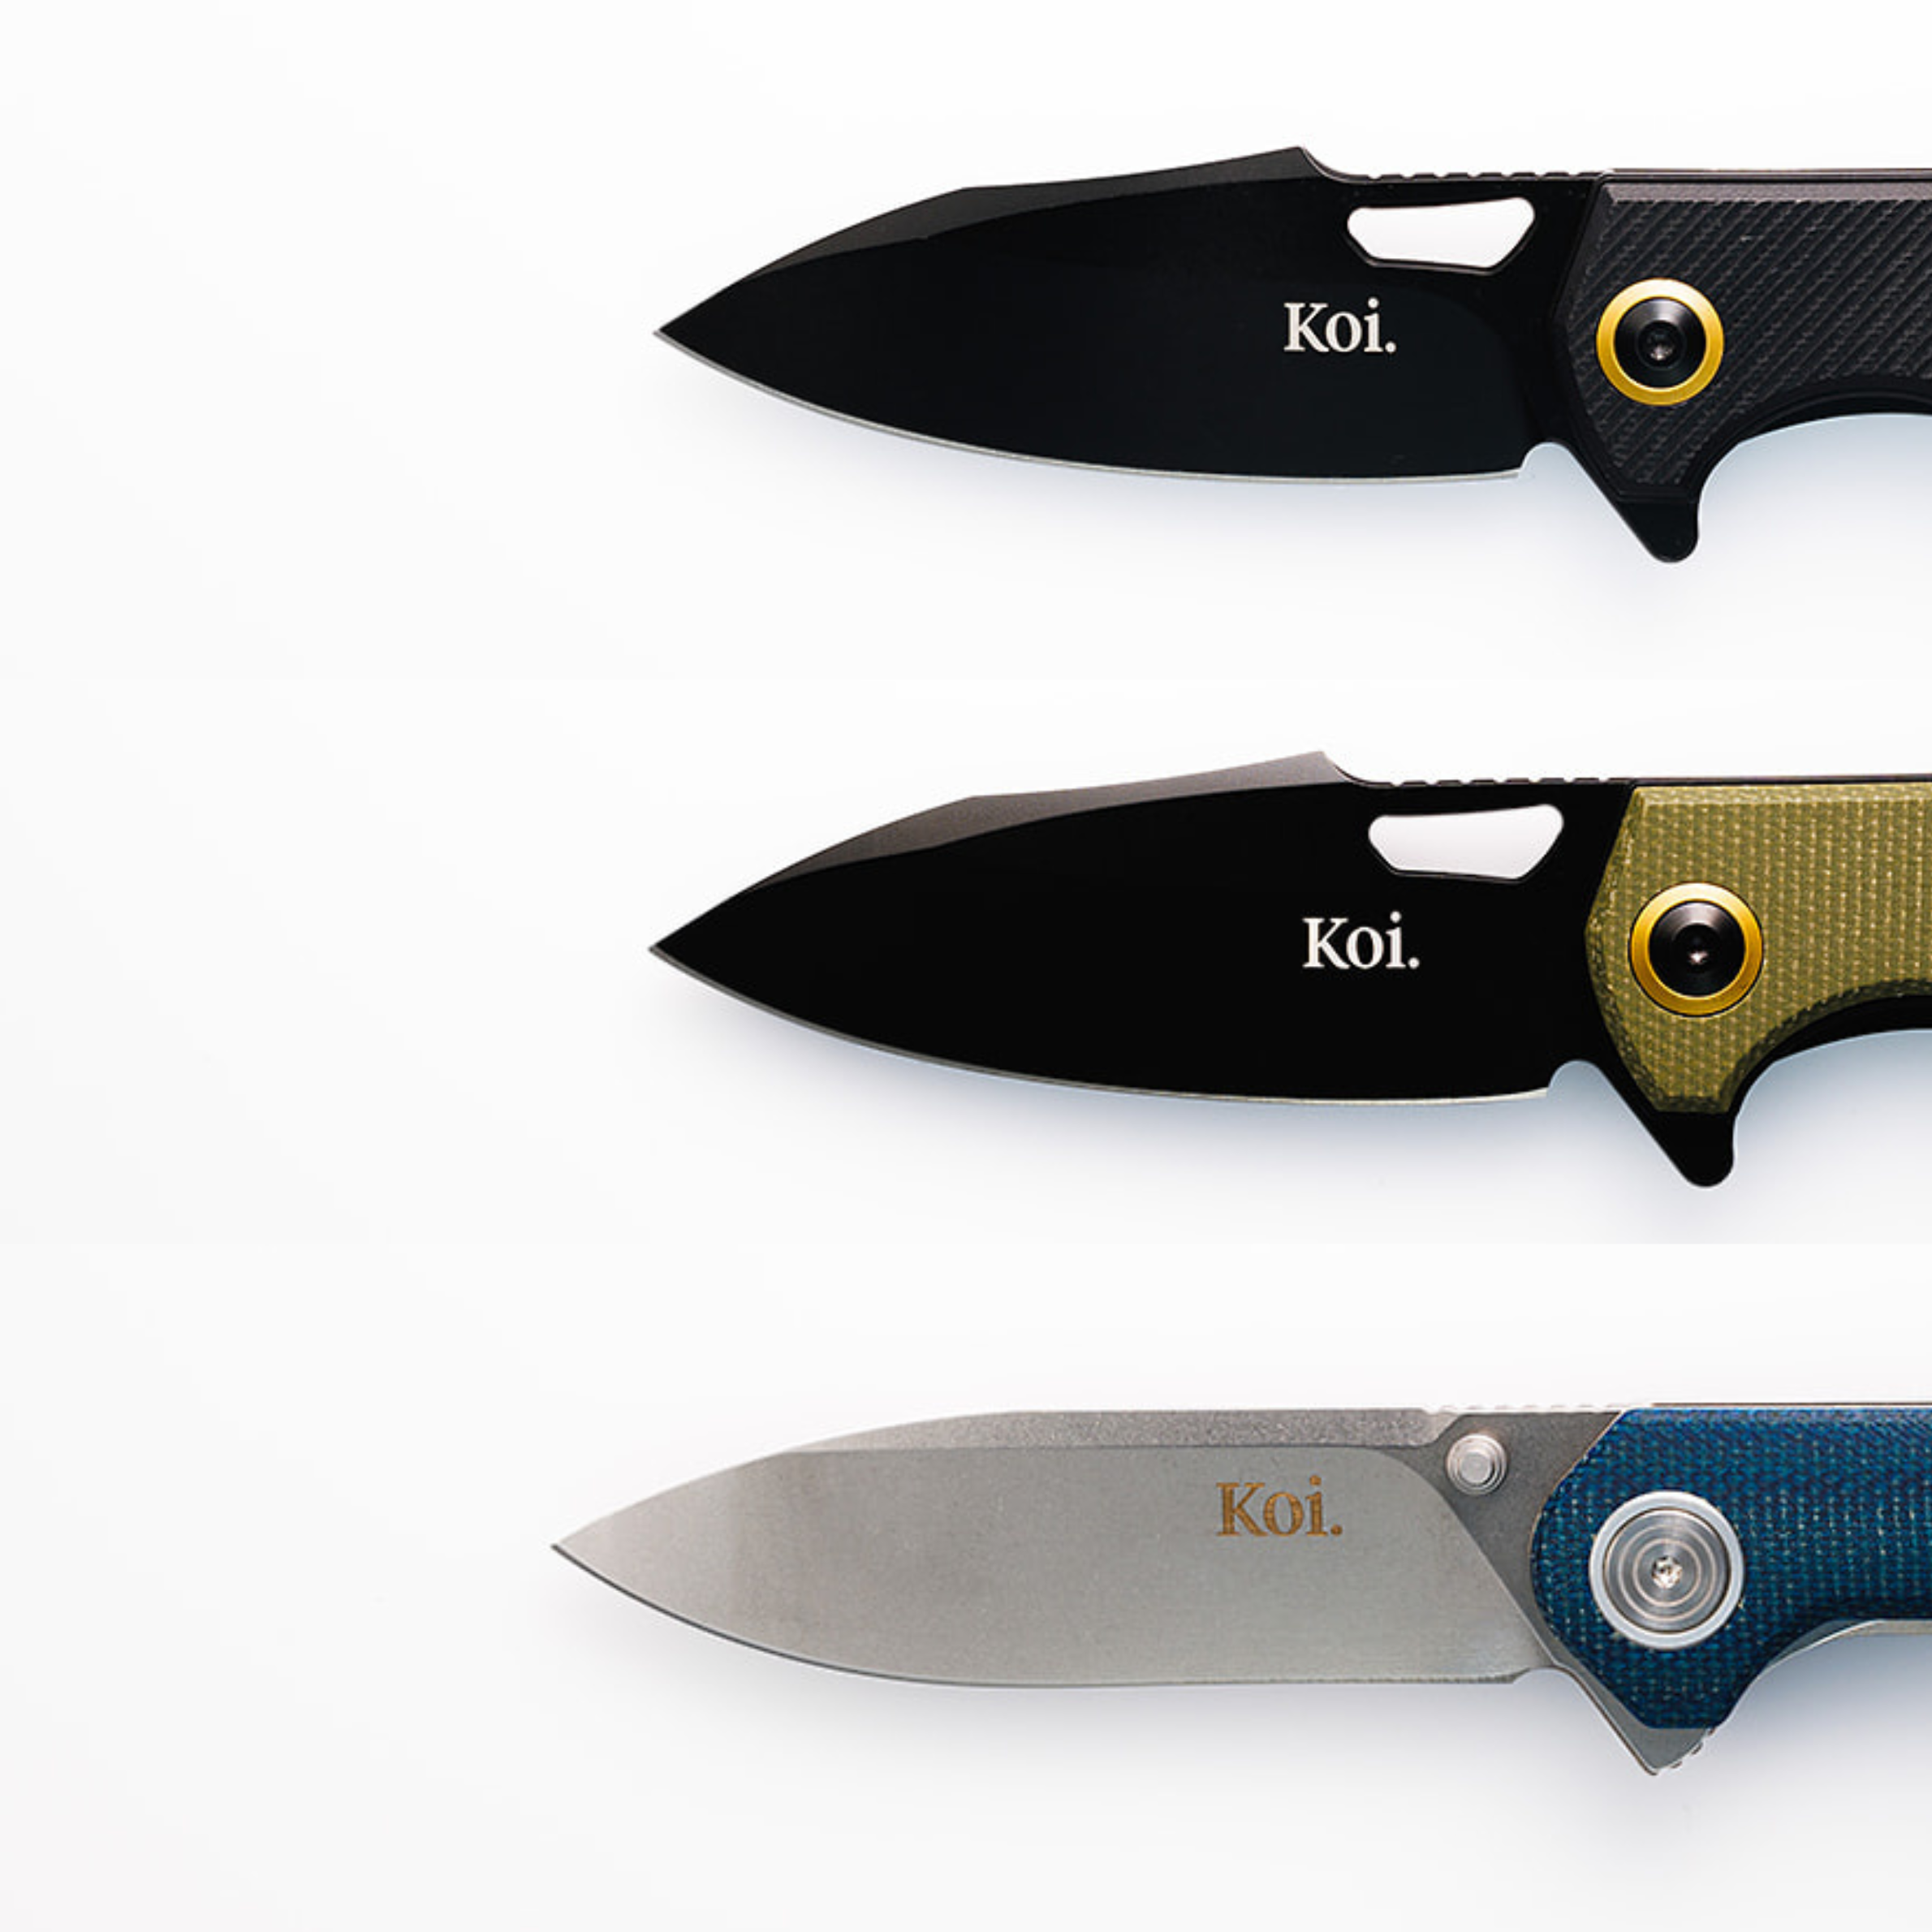 Collecting Pocket Knives: A Comprehensive Guide to Building Your